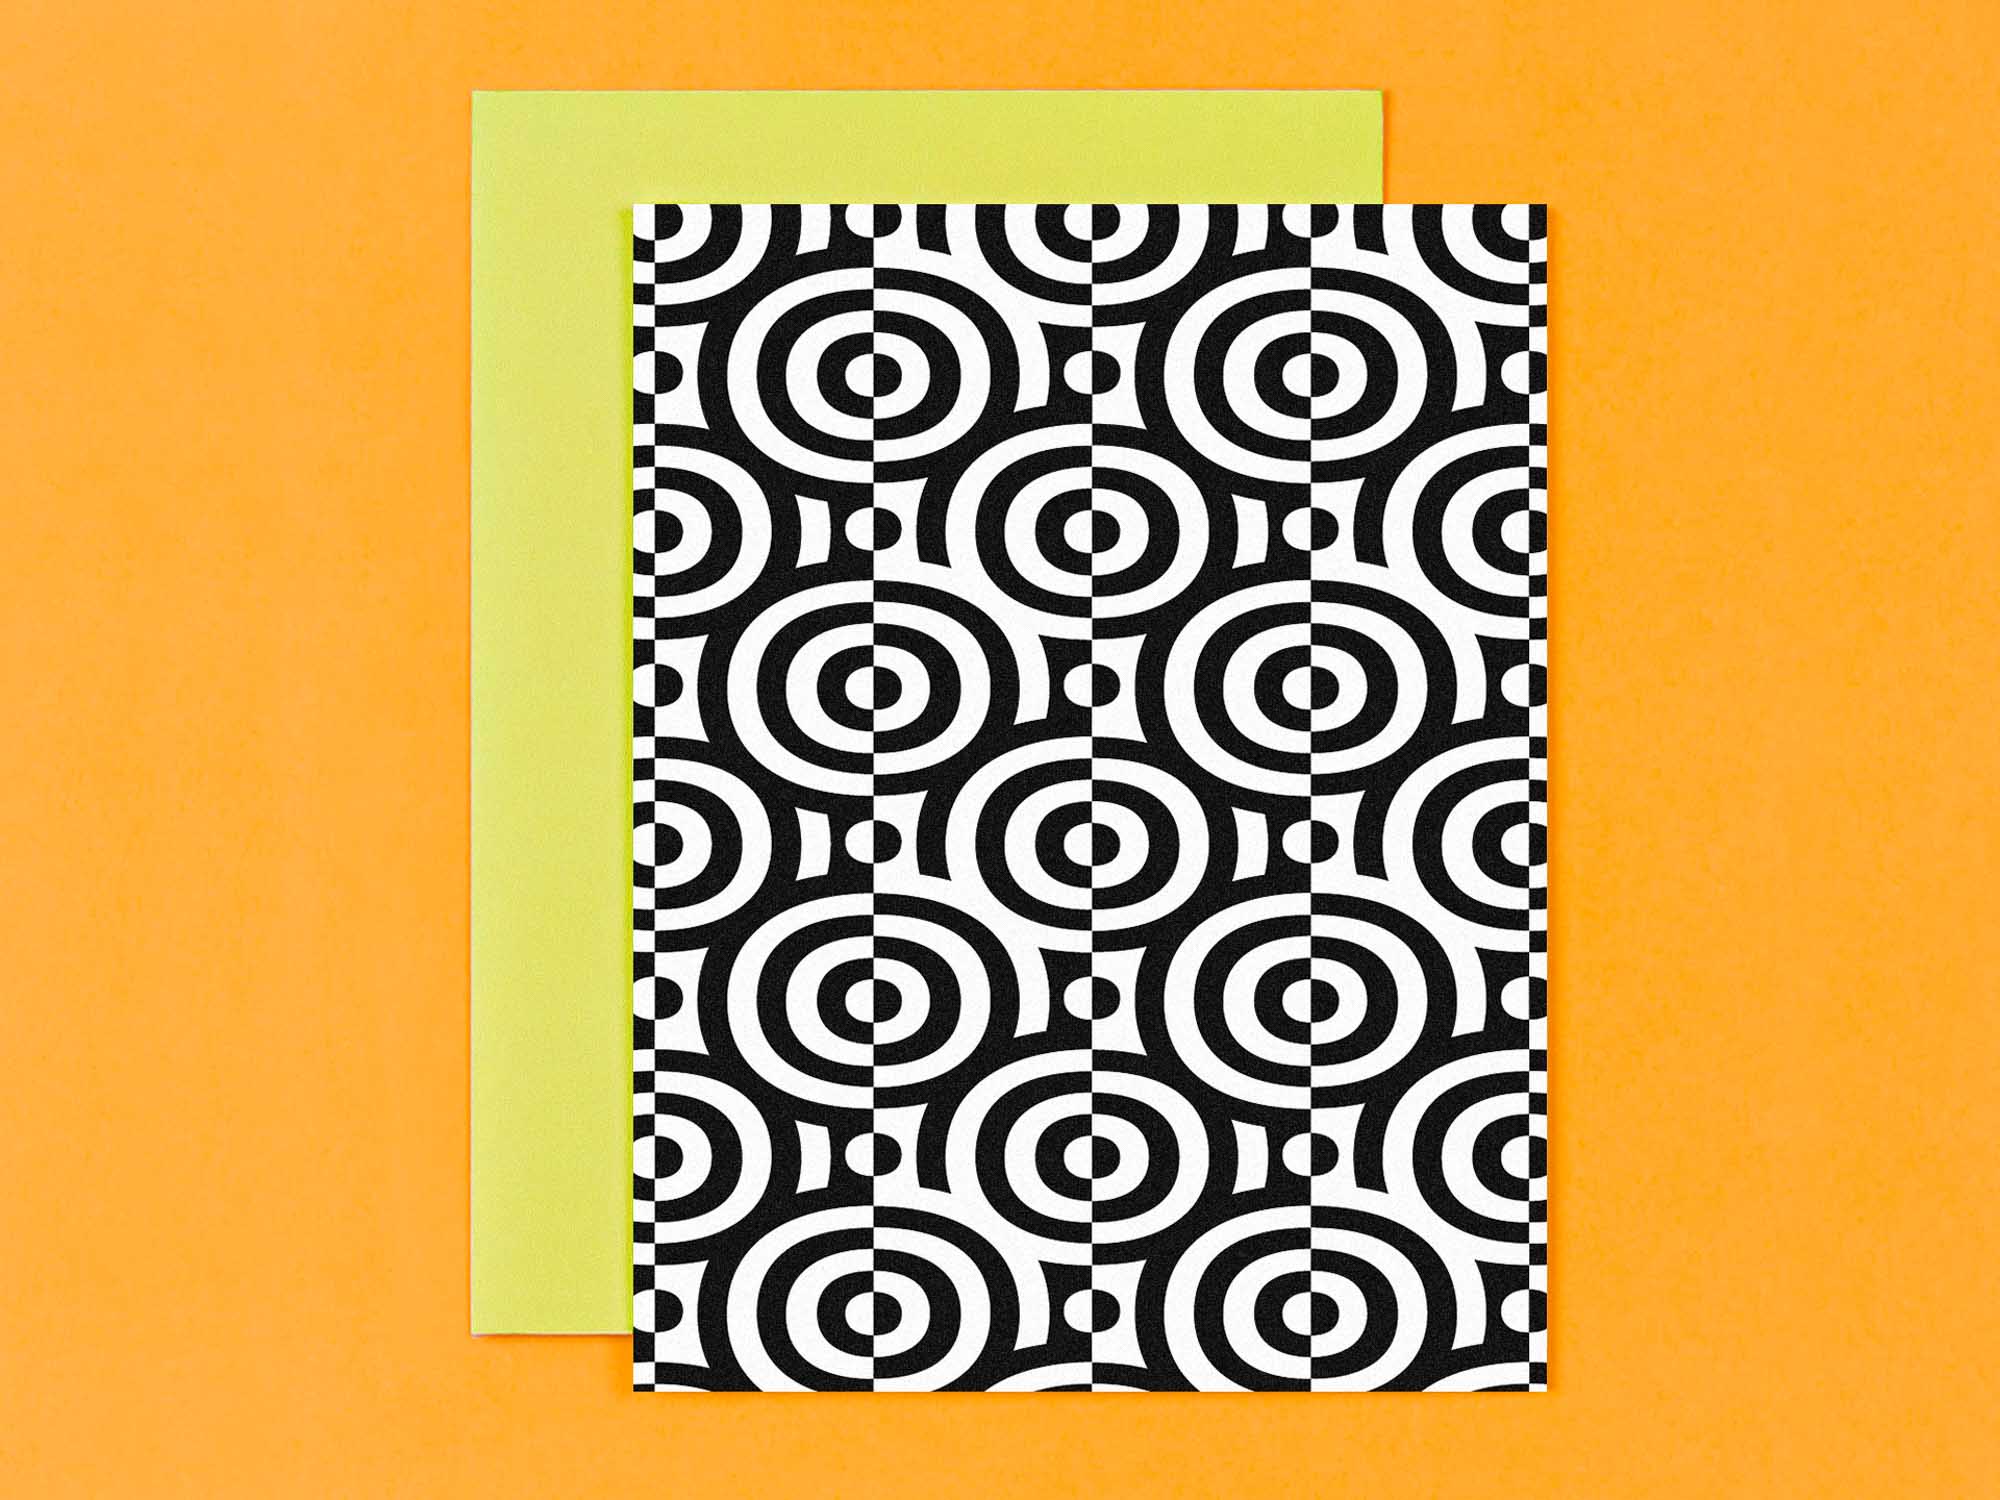 Hypnotic op art inspired nested rings pattern cards in black and white, all occasions greeting card. Made in USA by @mydarlin_bk